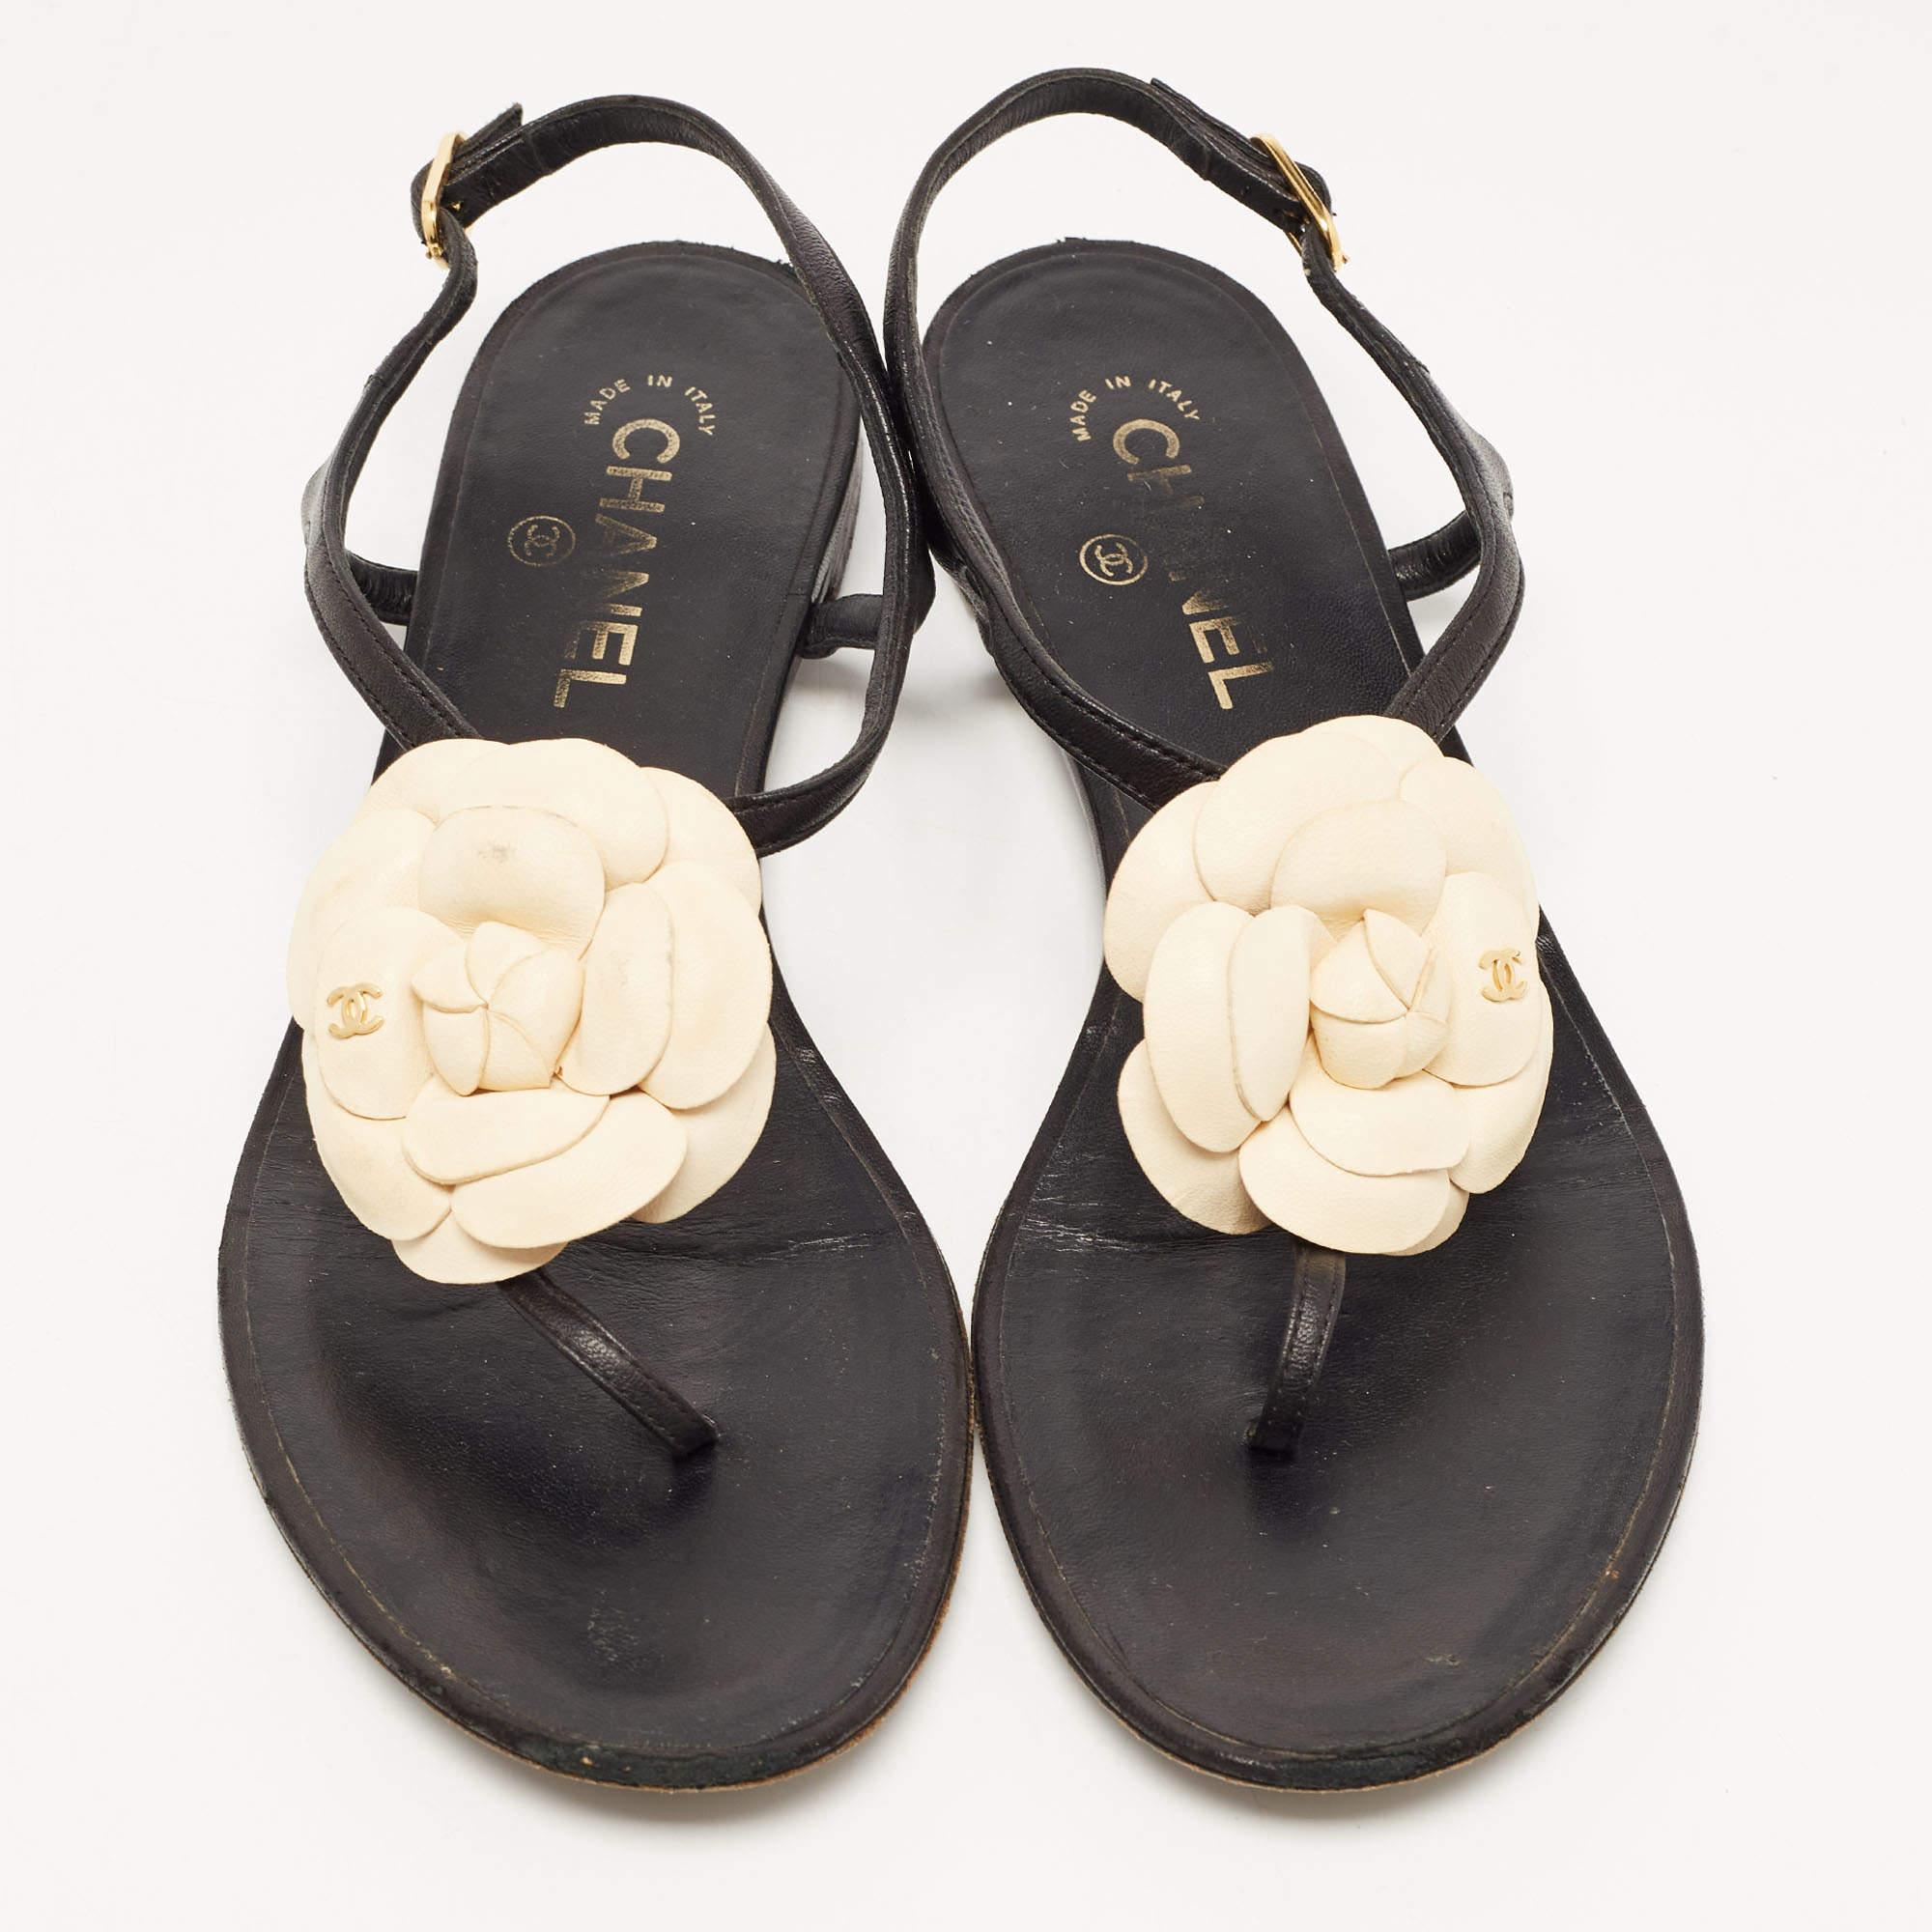 CHANEL SANDALS WITH LAMB LEATHER CAMELIA . never worn Black